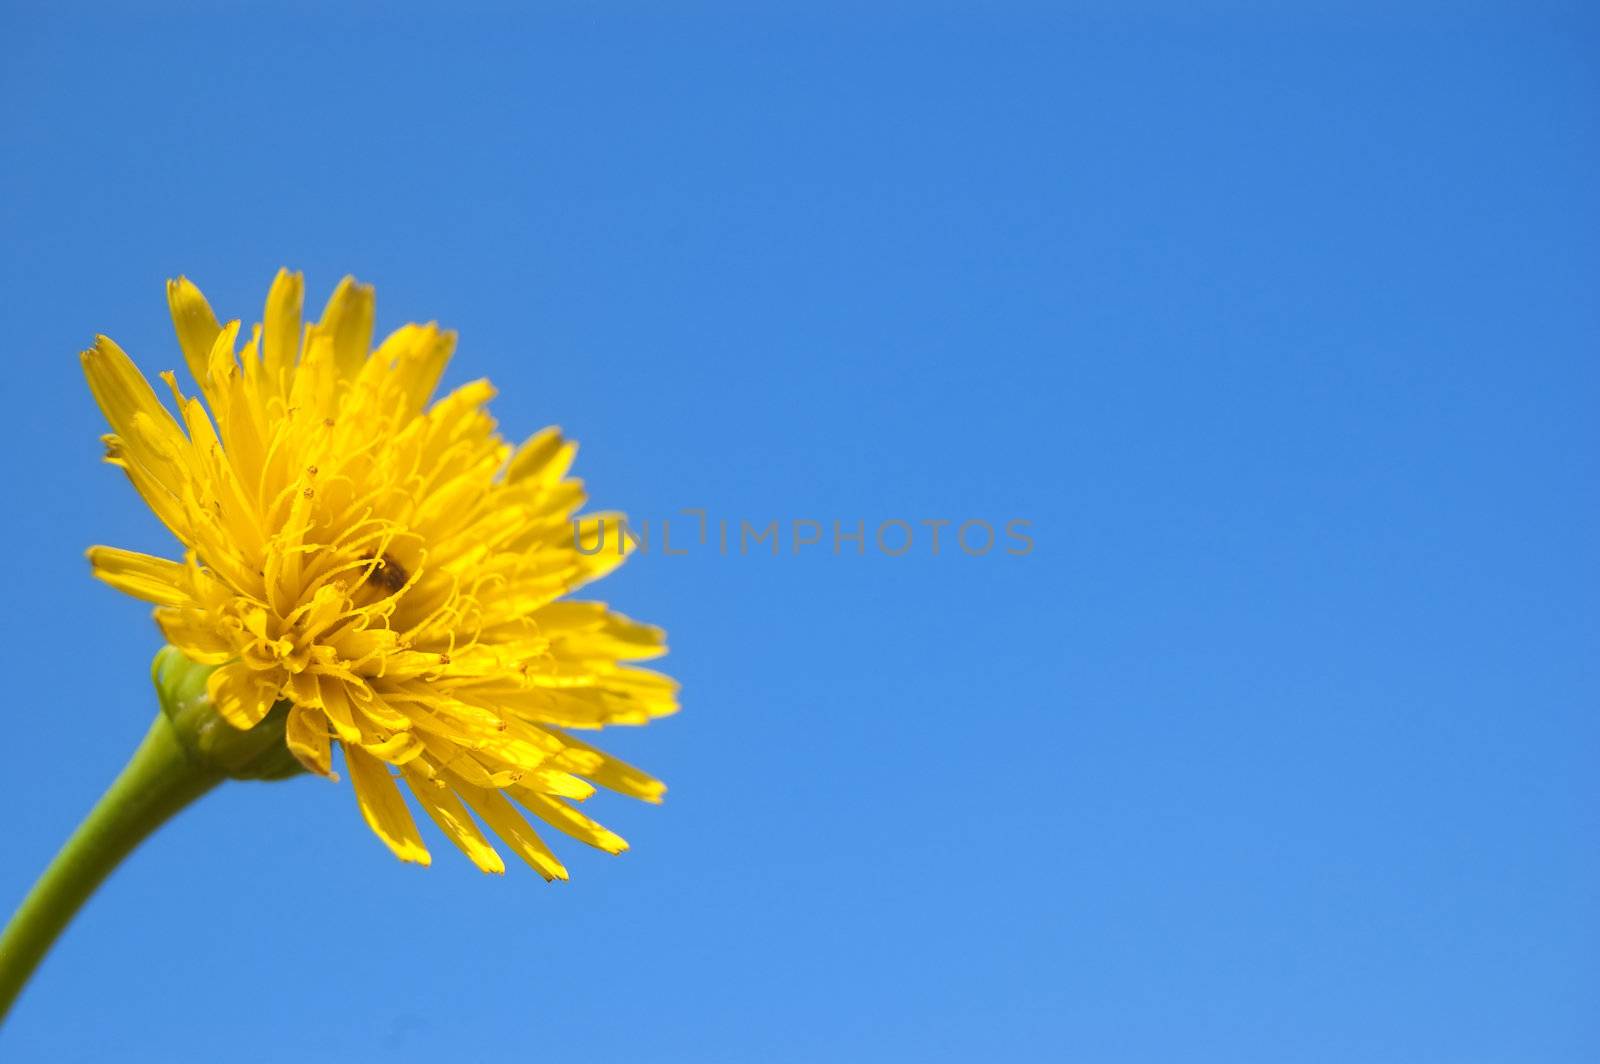 A yellow flower isolated on a blue sky